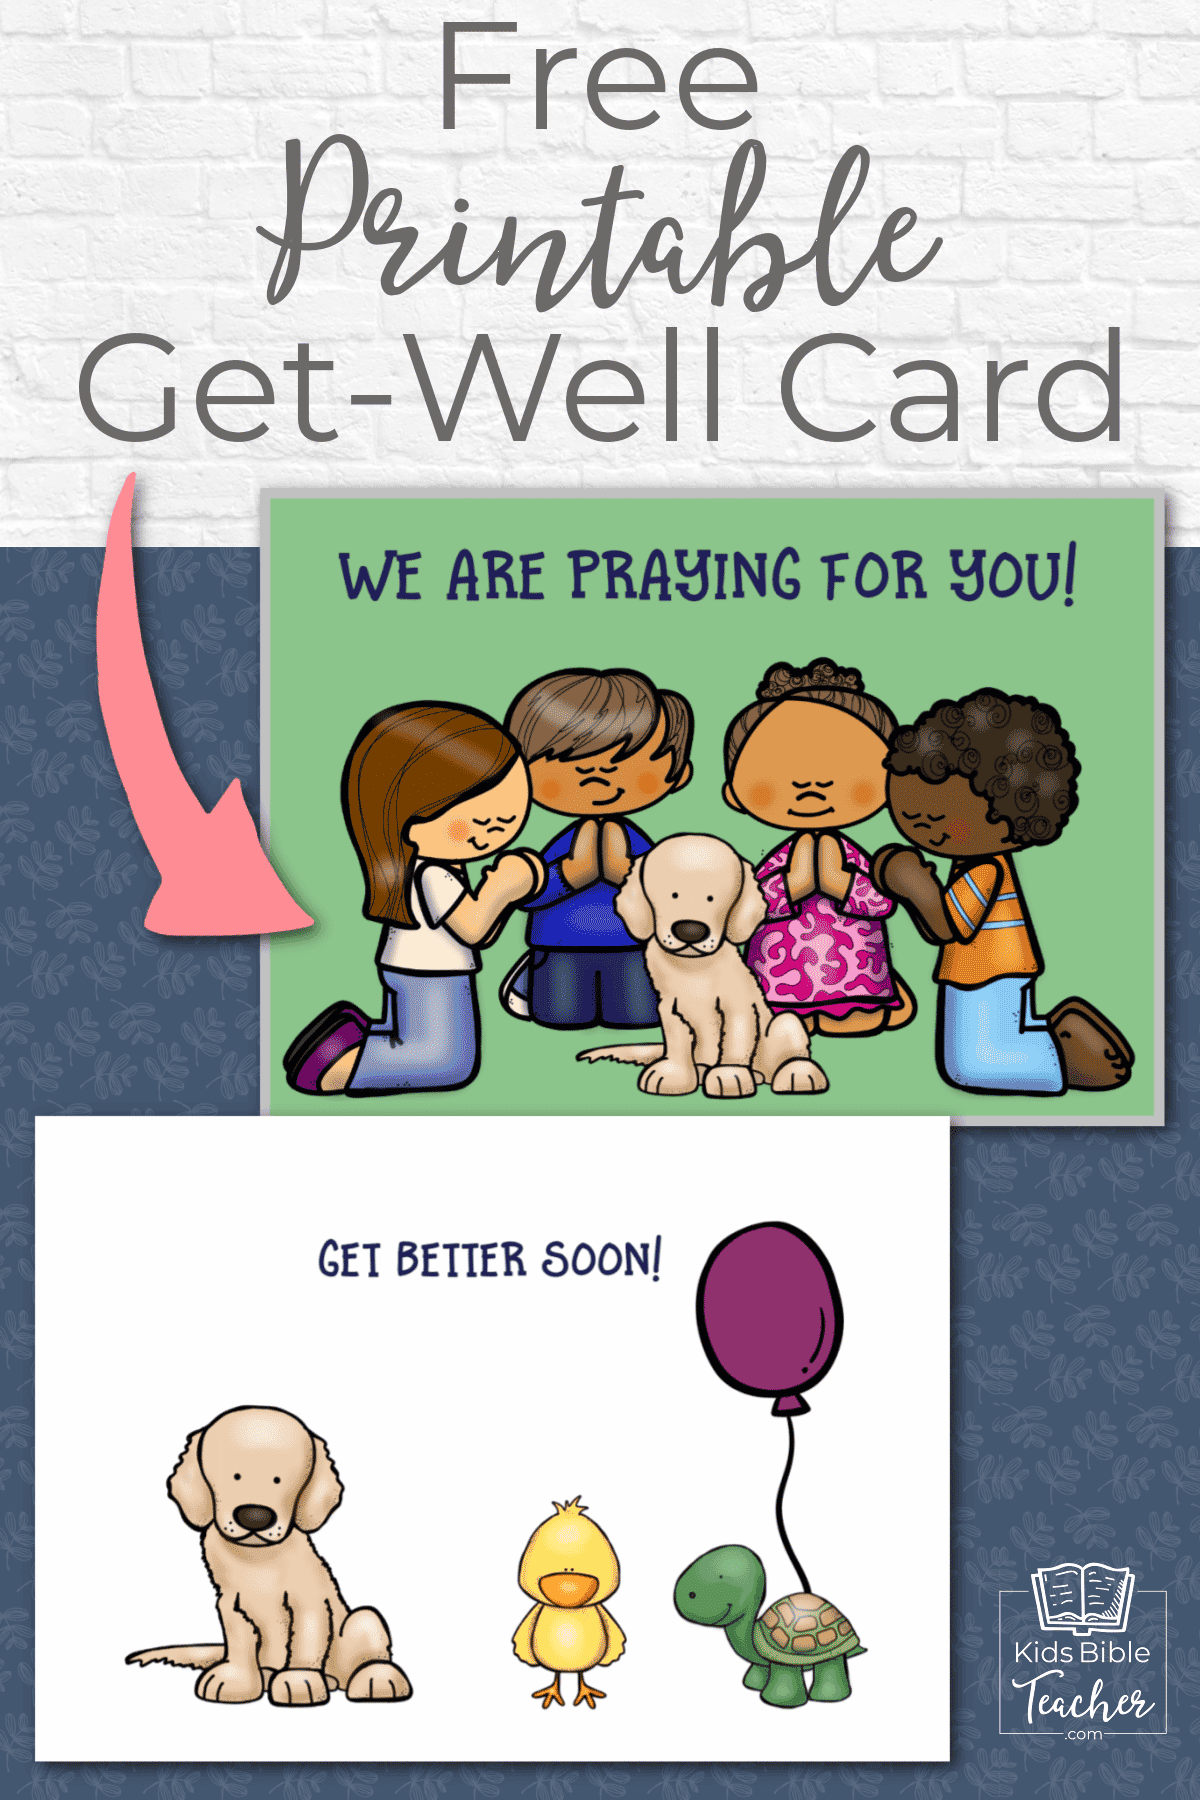 Easily encourage your kids when they are sick - with this FREE printable Get-Well card, perfect for a classroom! Kids Bible Teacher.com